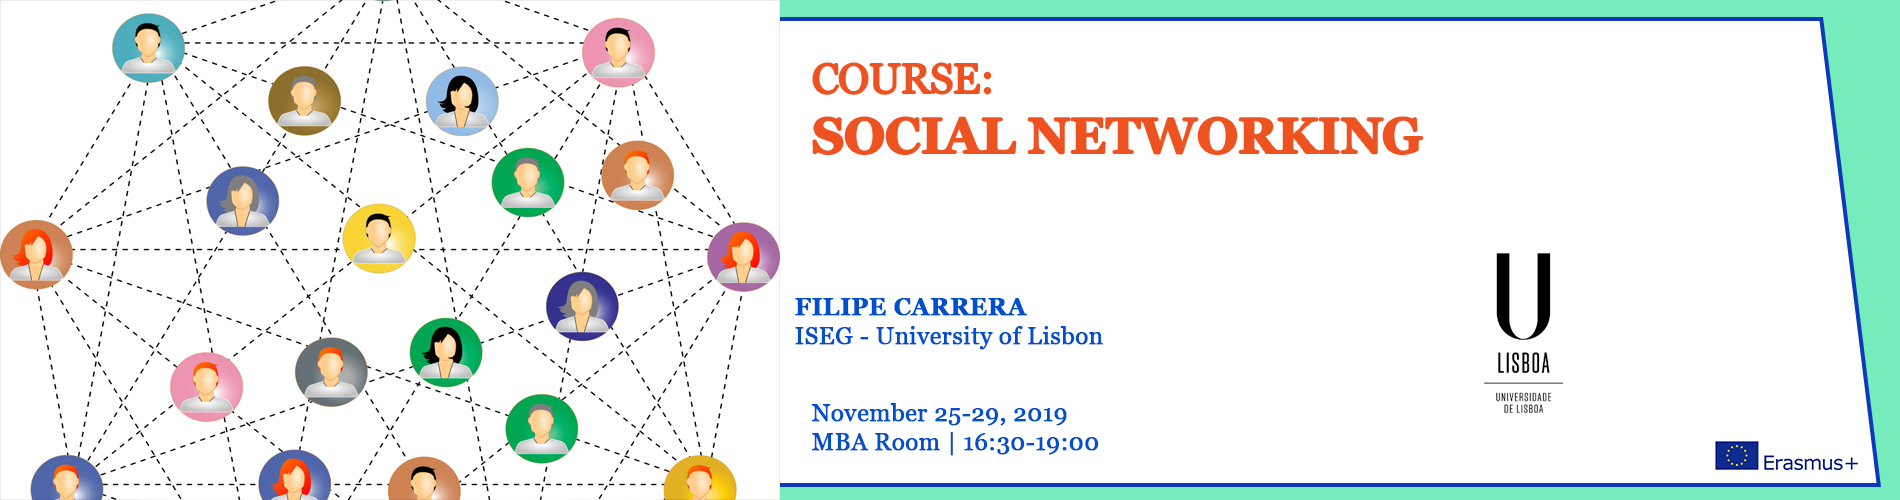 25.11 - Social Networking